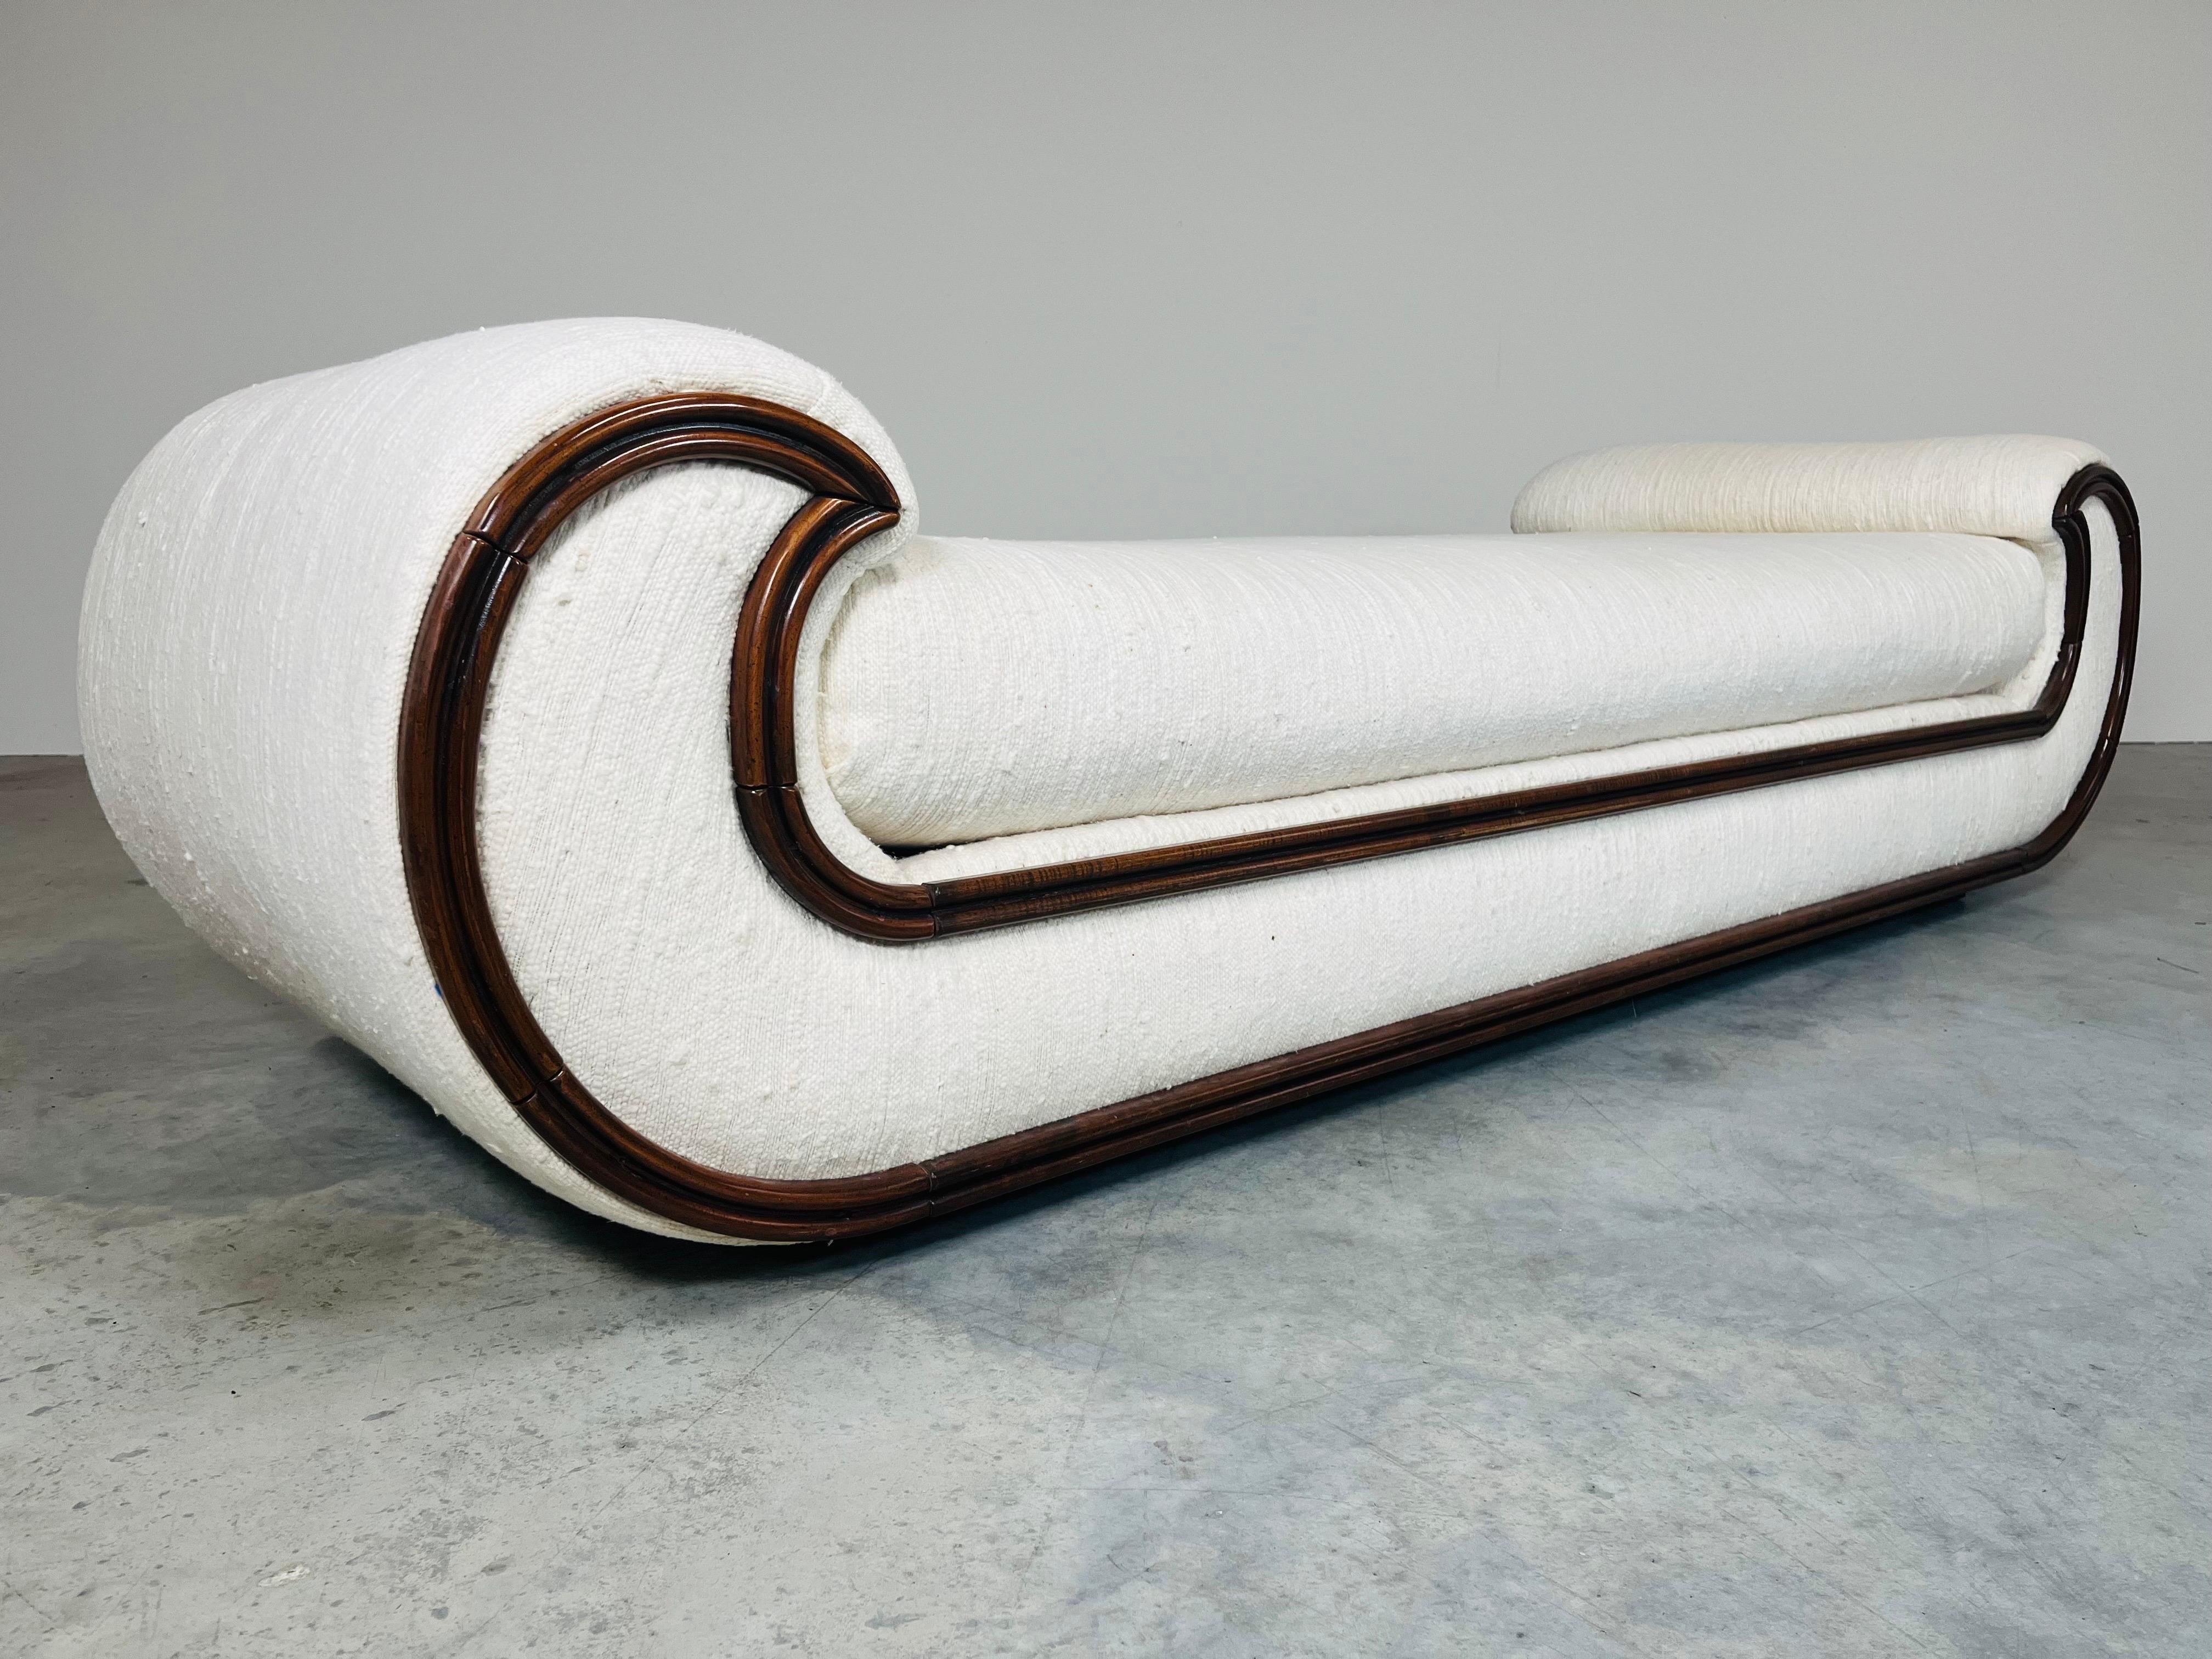 Upholstery 1970's Hollywood Regency Chaise Lounge or Daybed by Vivai del Sud, Italy